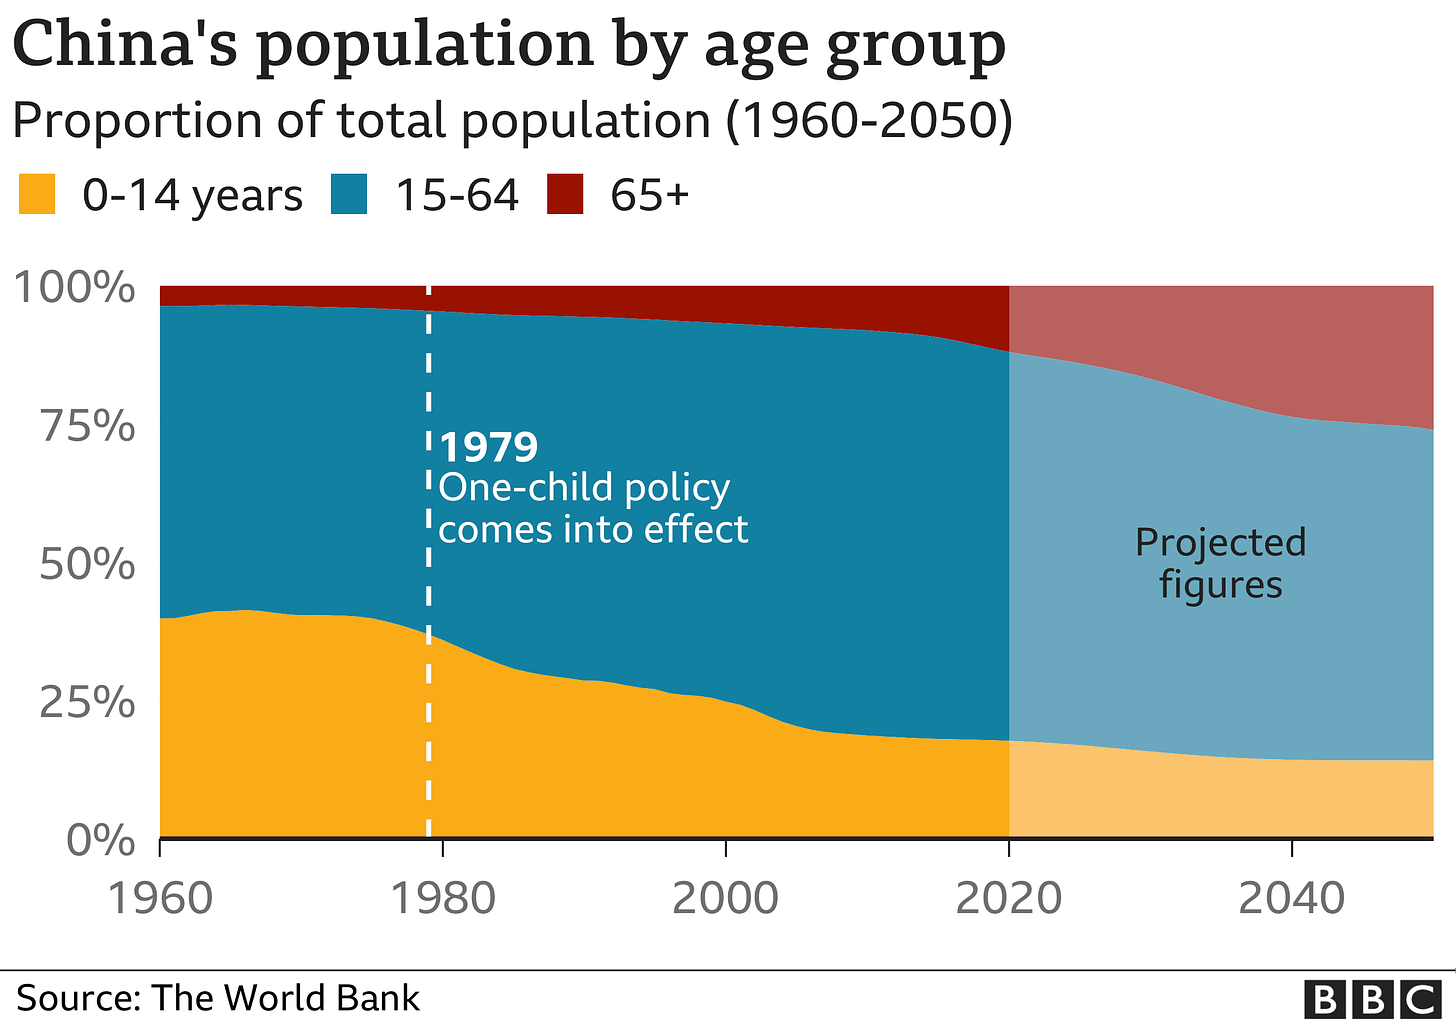 graph showing China's population by age group